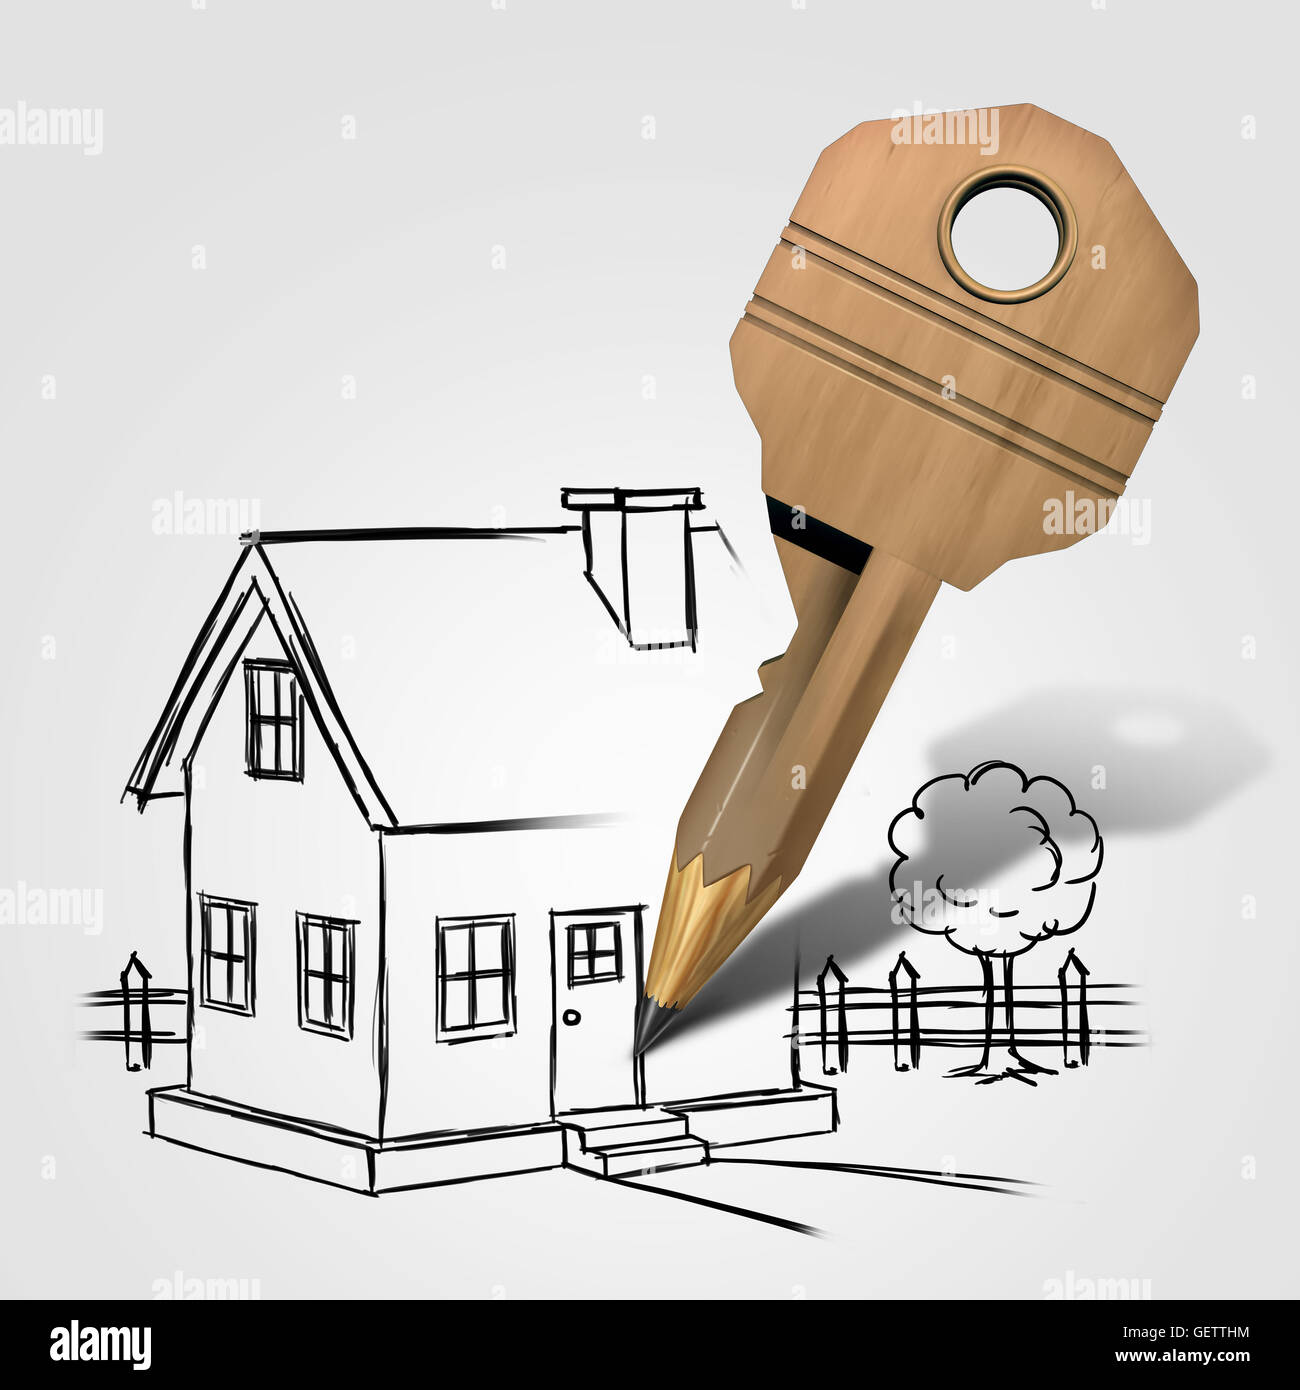 House key drawing and planning a family home solution concept as a pencil shaped lock object sketching a dream residence as an architecture and construction or renovation symbol with 3D ilustration elements. Stock Photo